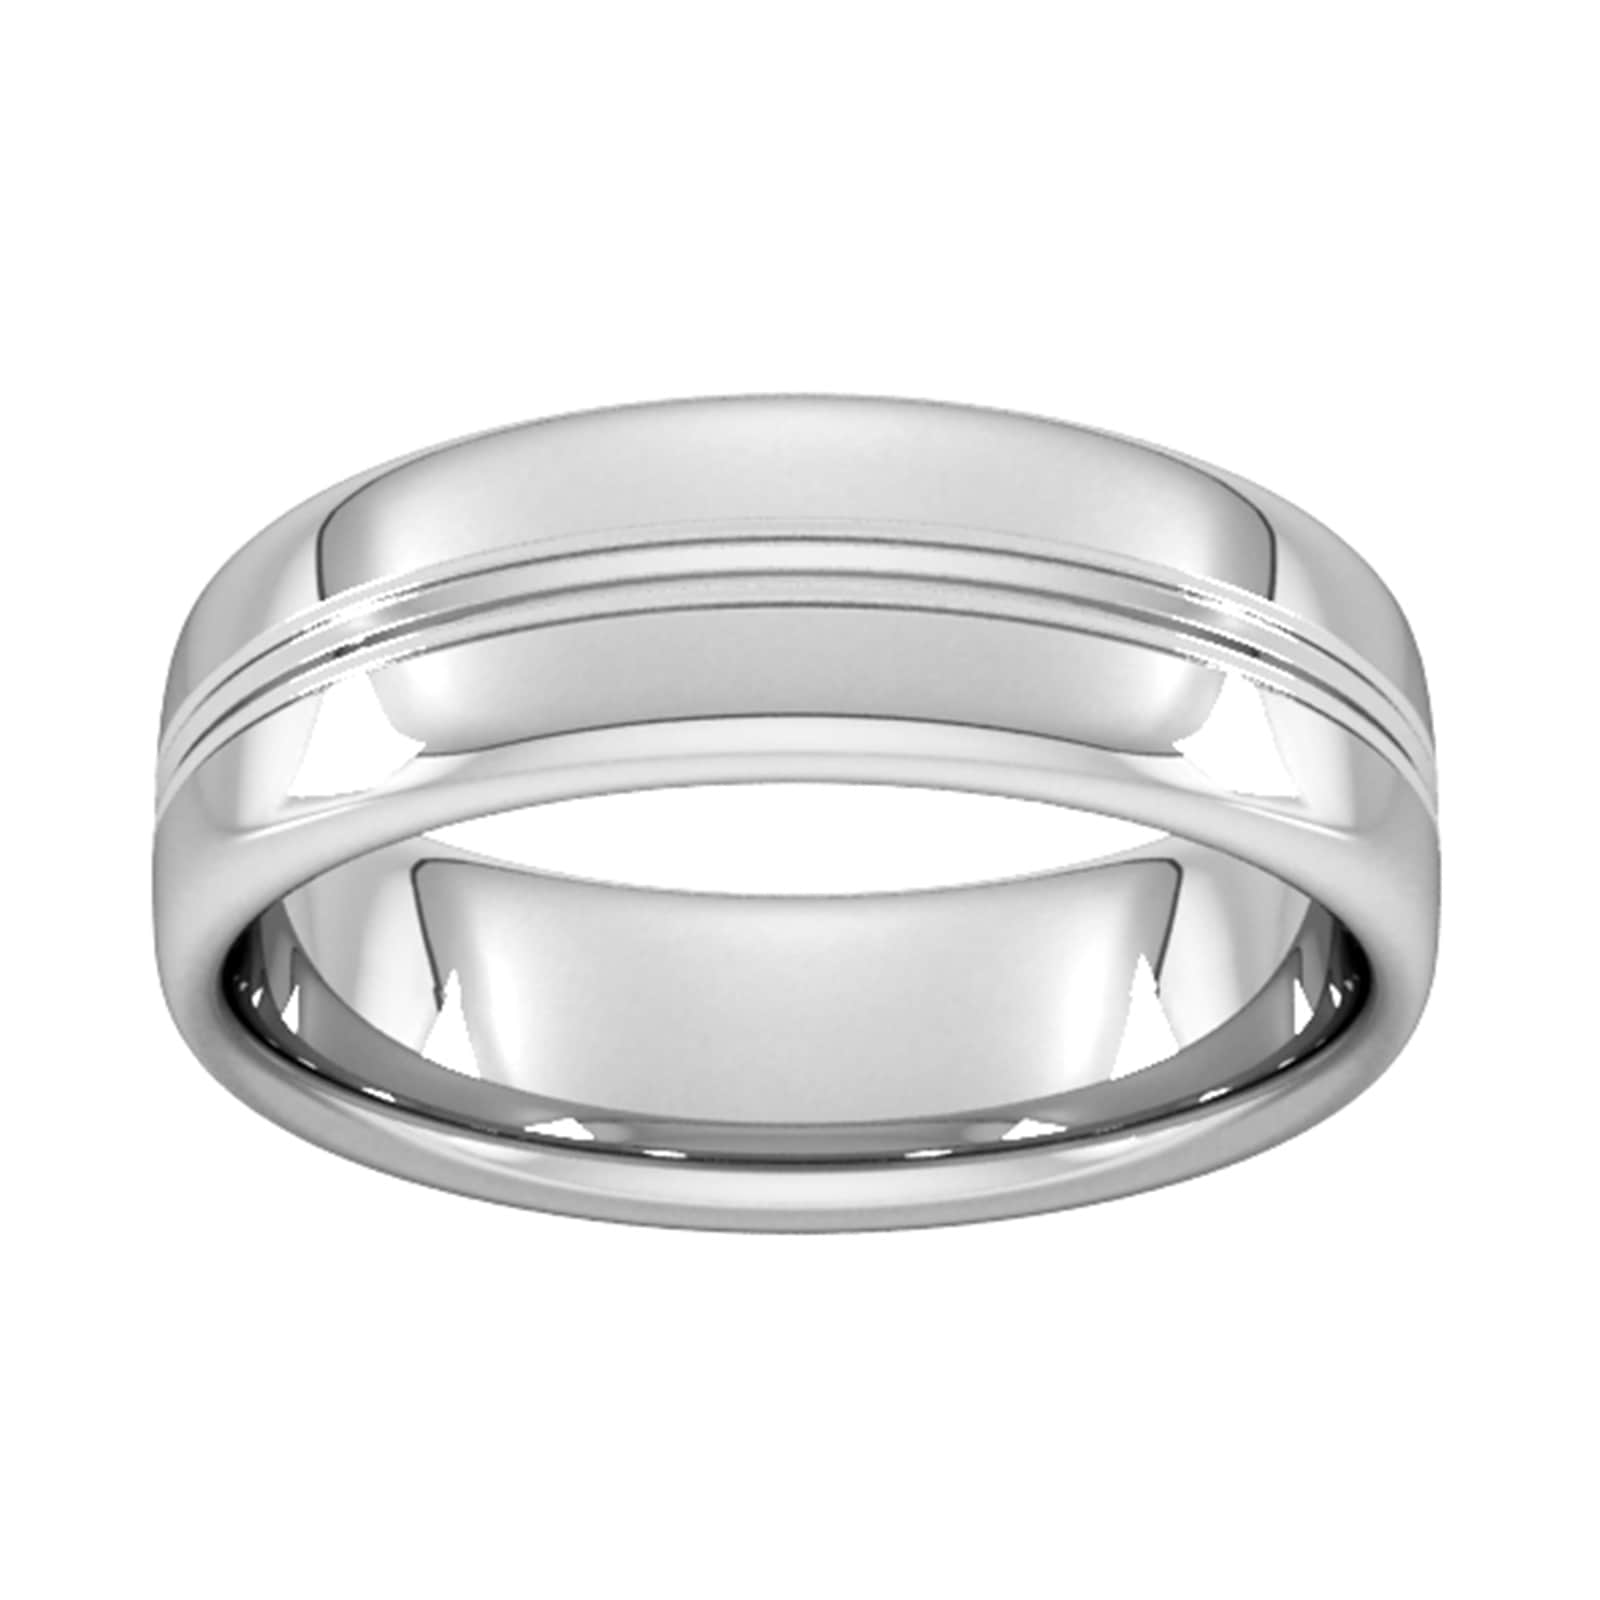 7mm Slight Court Heavy Grooved Polished Finish Wedding Ring In 950 Palladium - Ring Size N